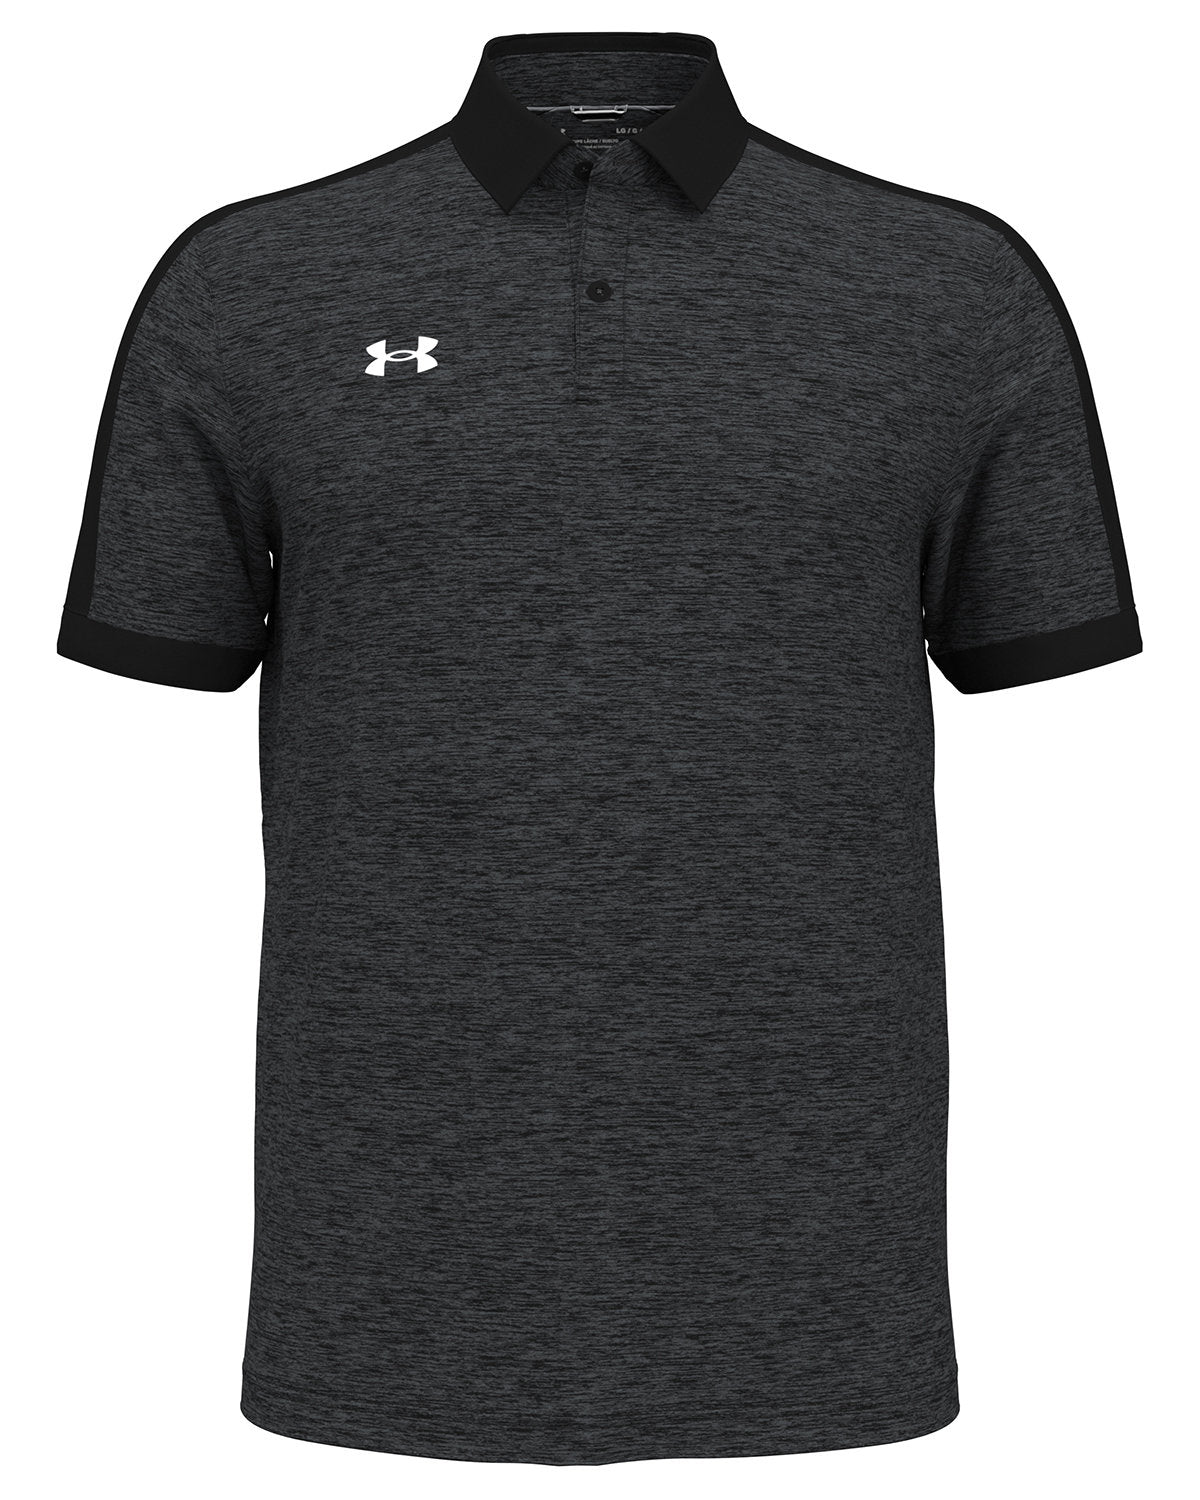 Under Armour Trophy Level Polo with Custom Embroidery, 1376907